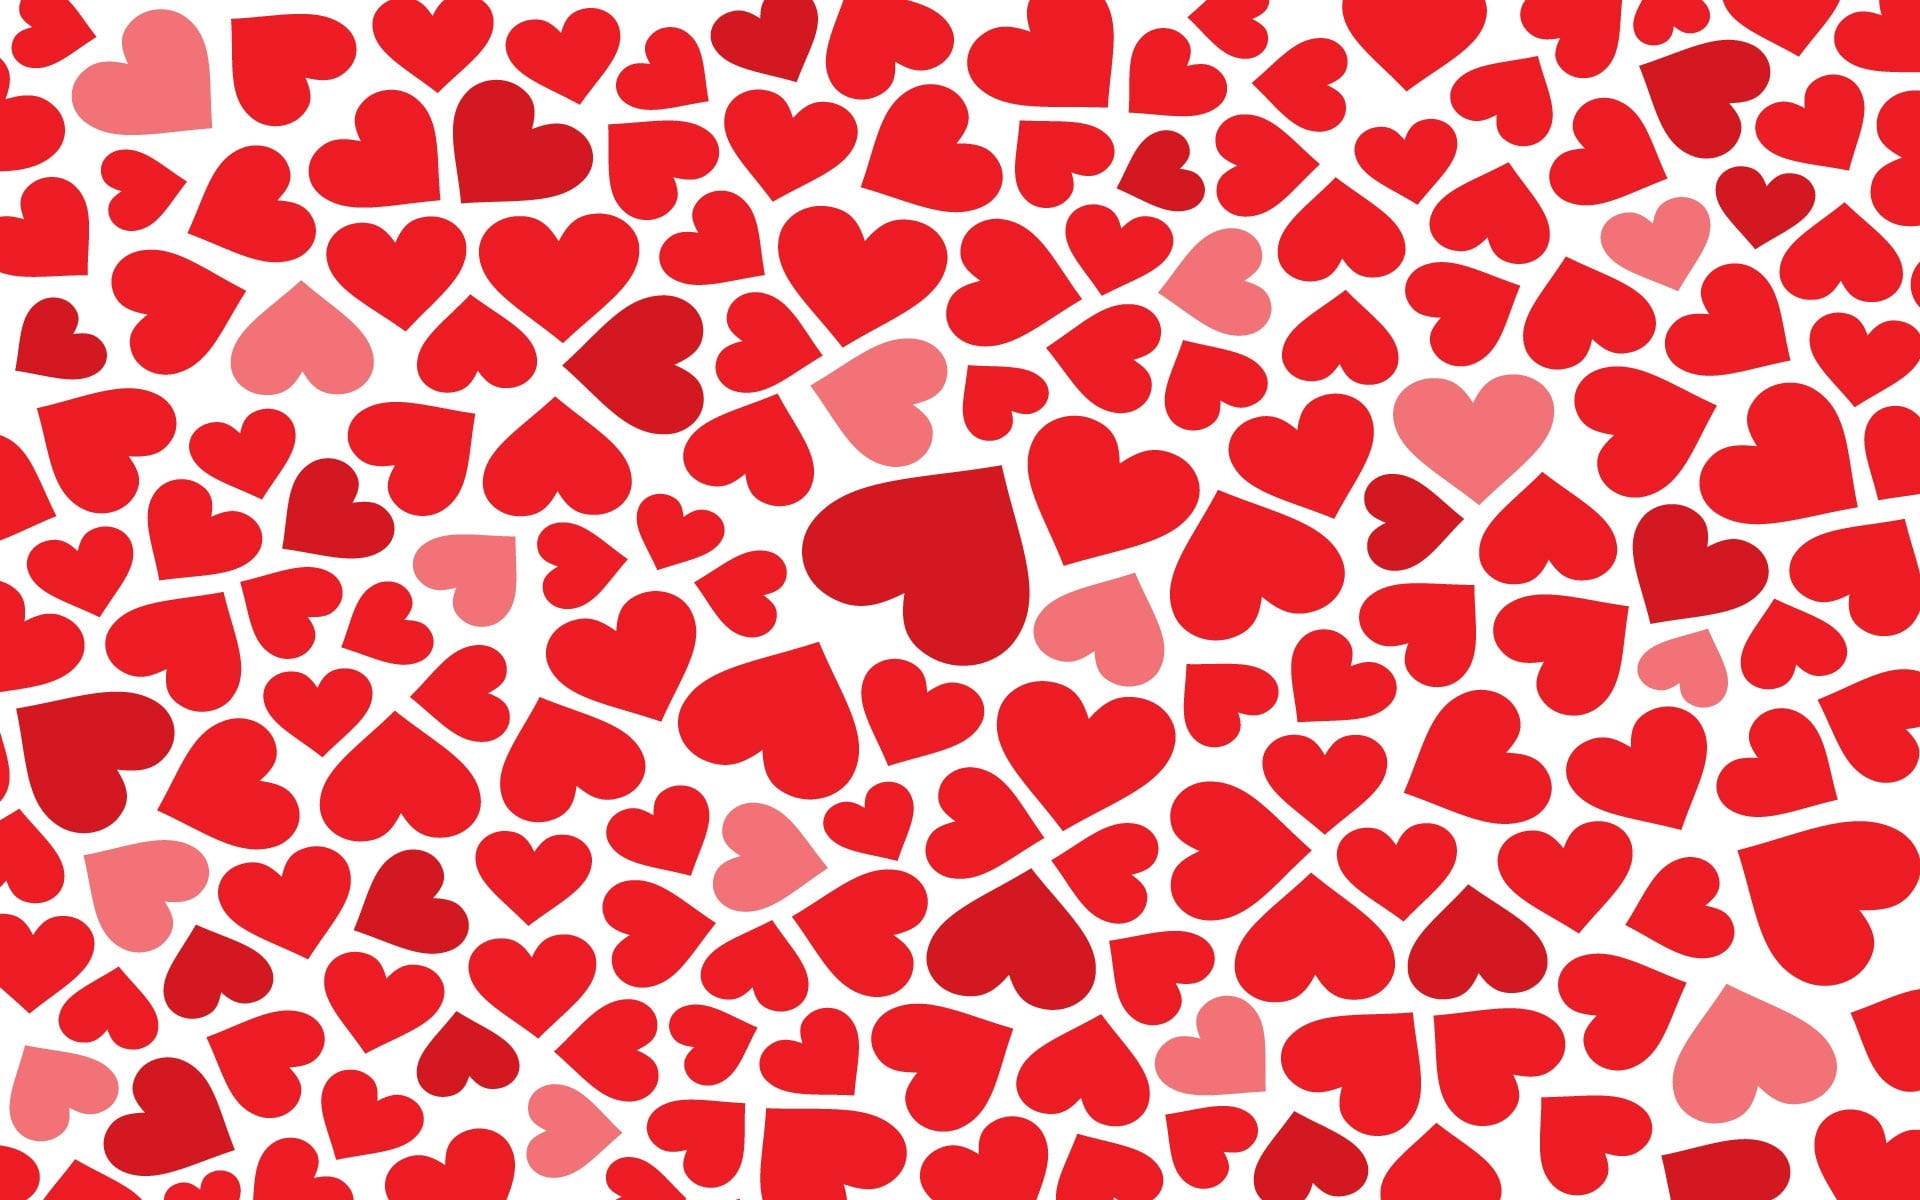 red hearts clip art, texture, pattern, backgrounds, illustration